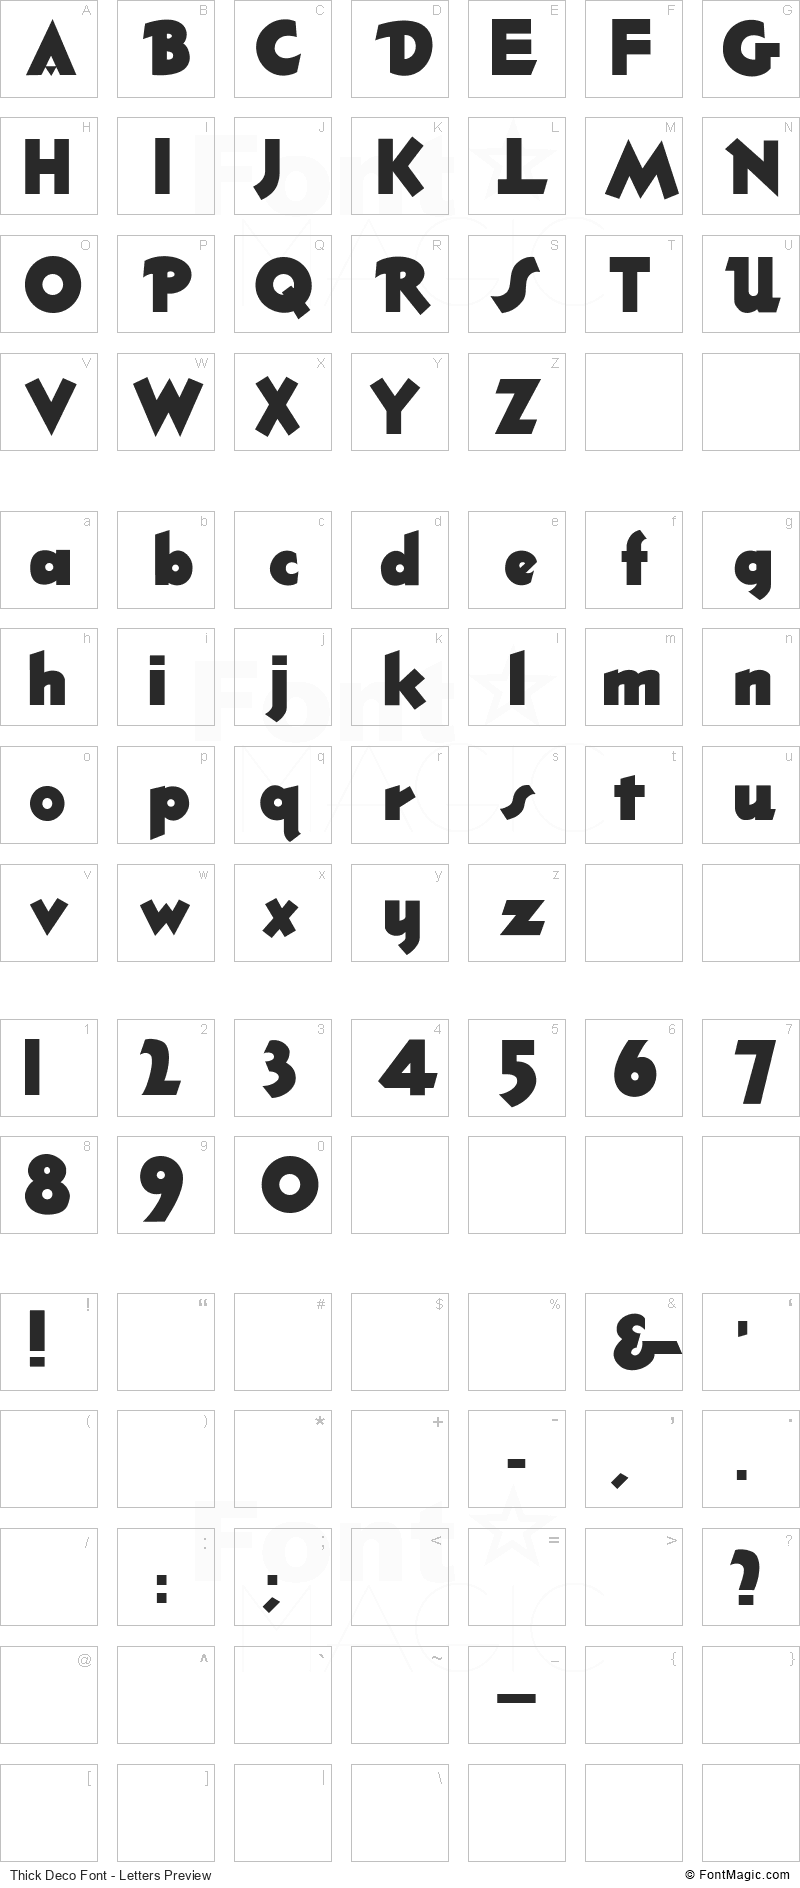 Thick Deco Font - All Latters Preview Chart